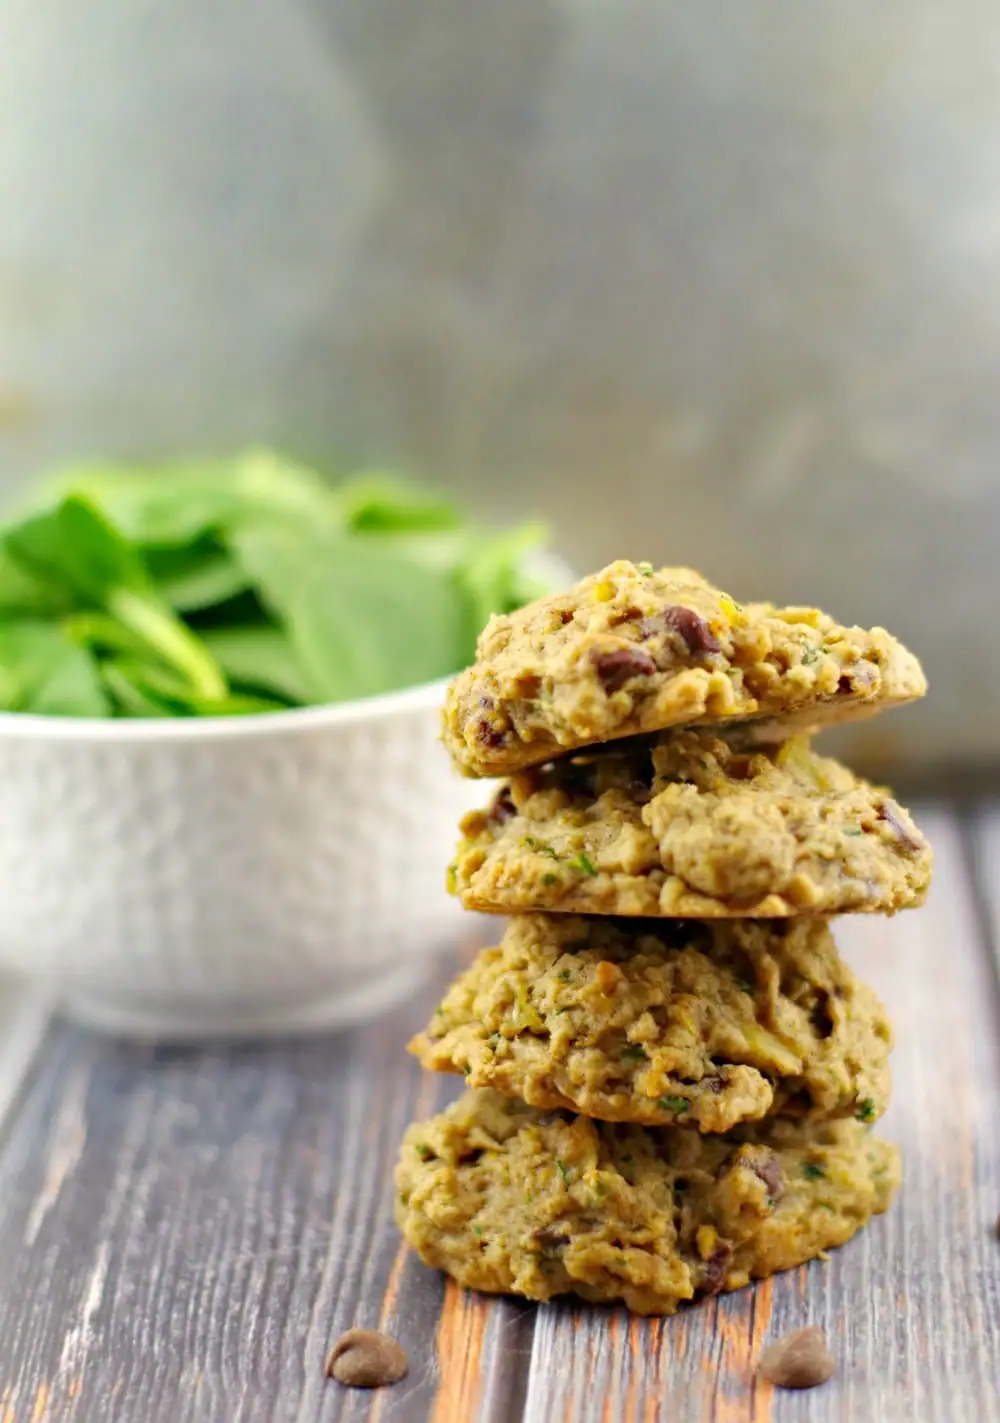 Award-Winning Tropical Green Chocolate Chip cookies #healthy chocolate chip cookie #spinach | foodmeanderings.com